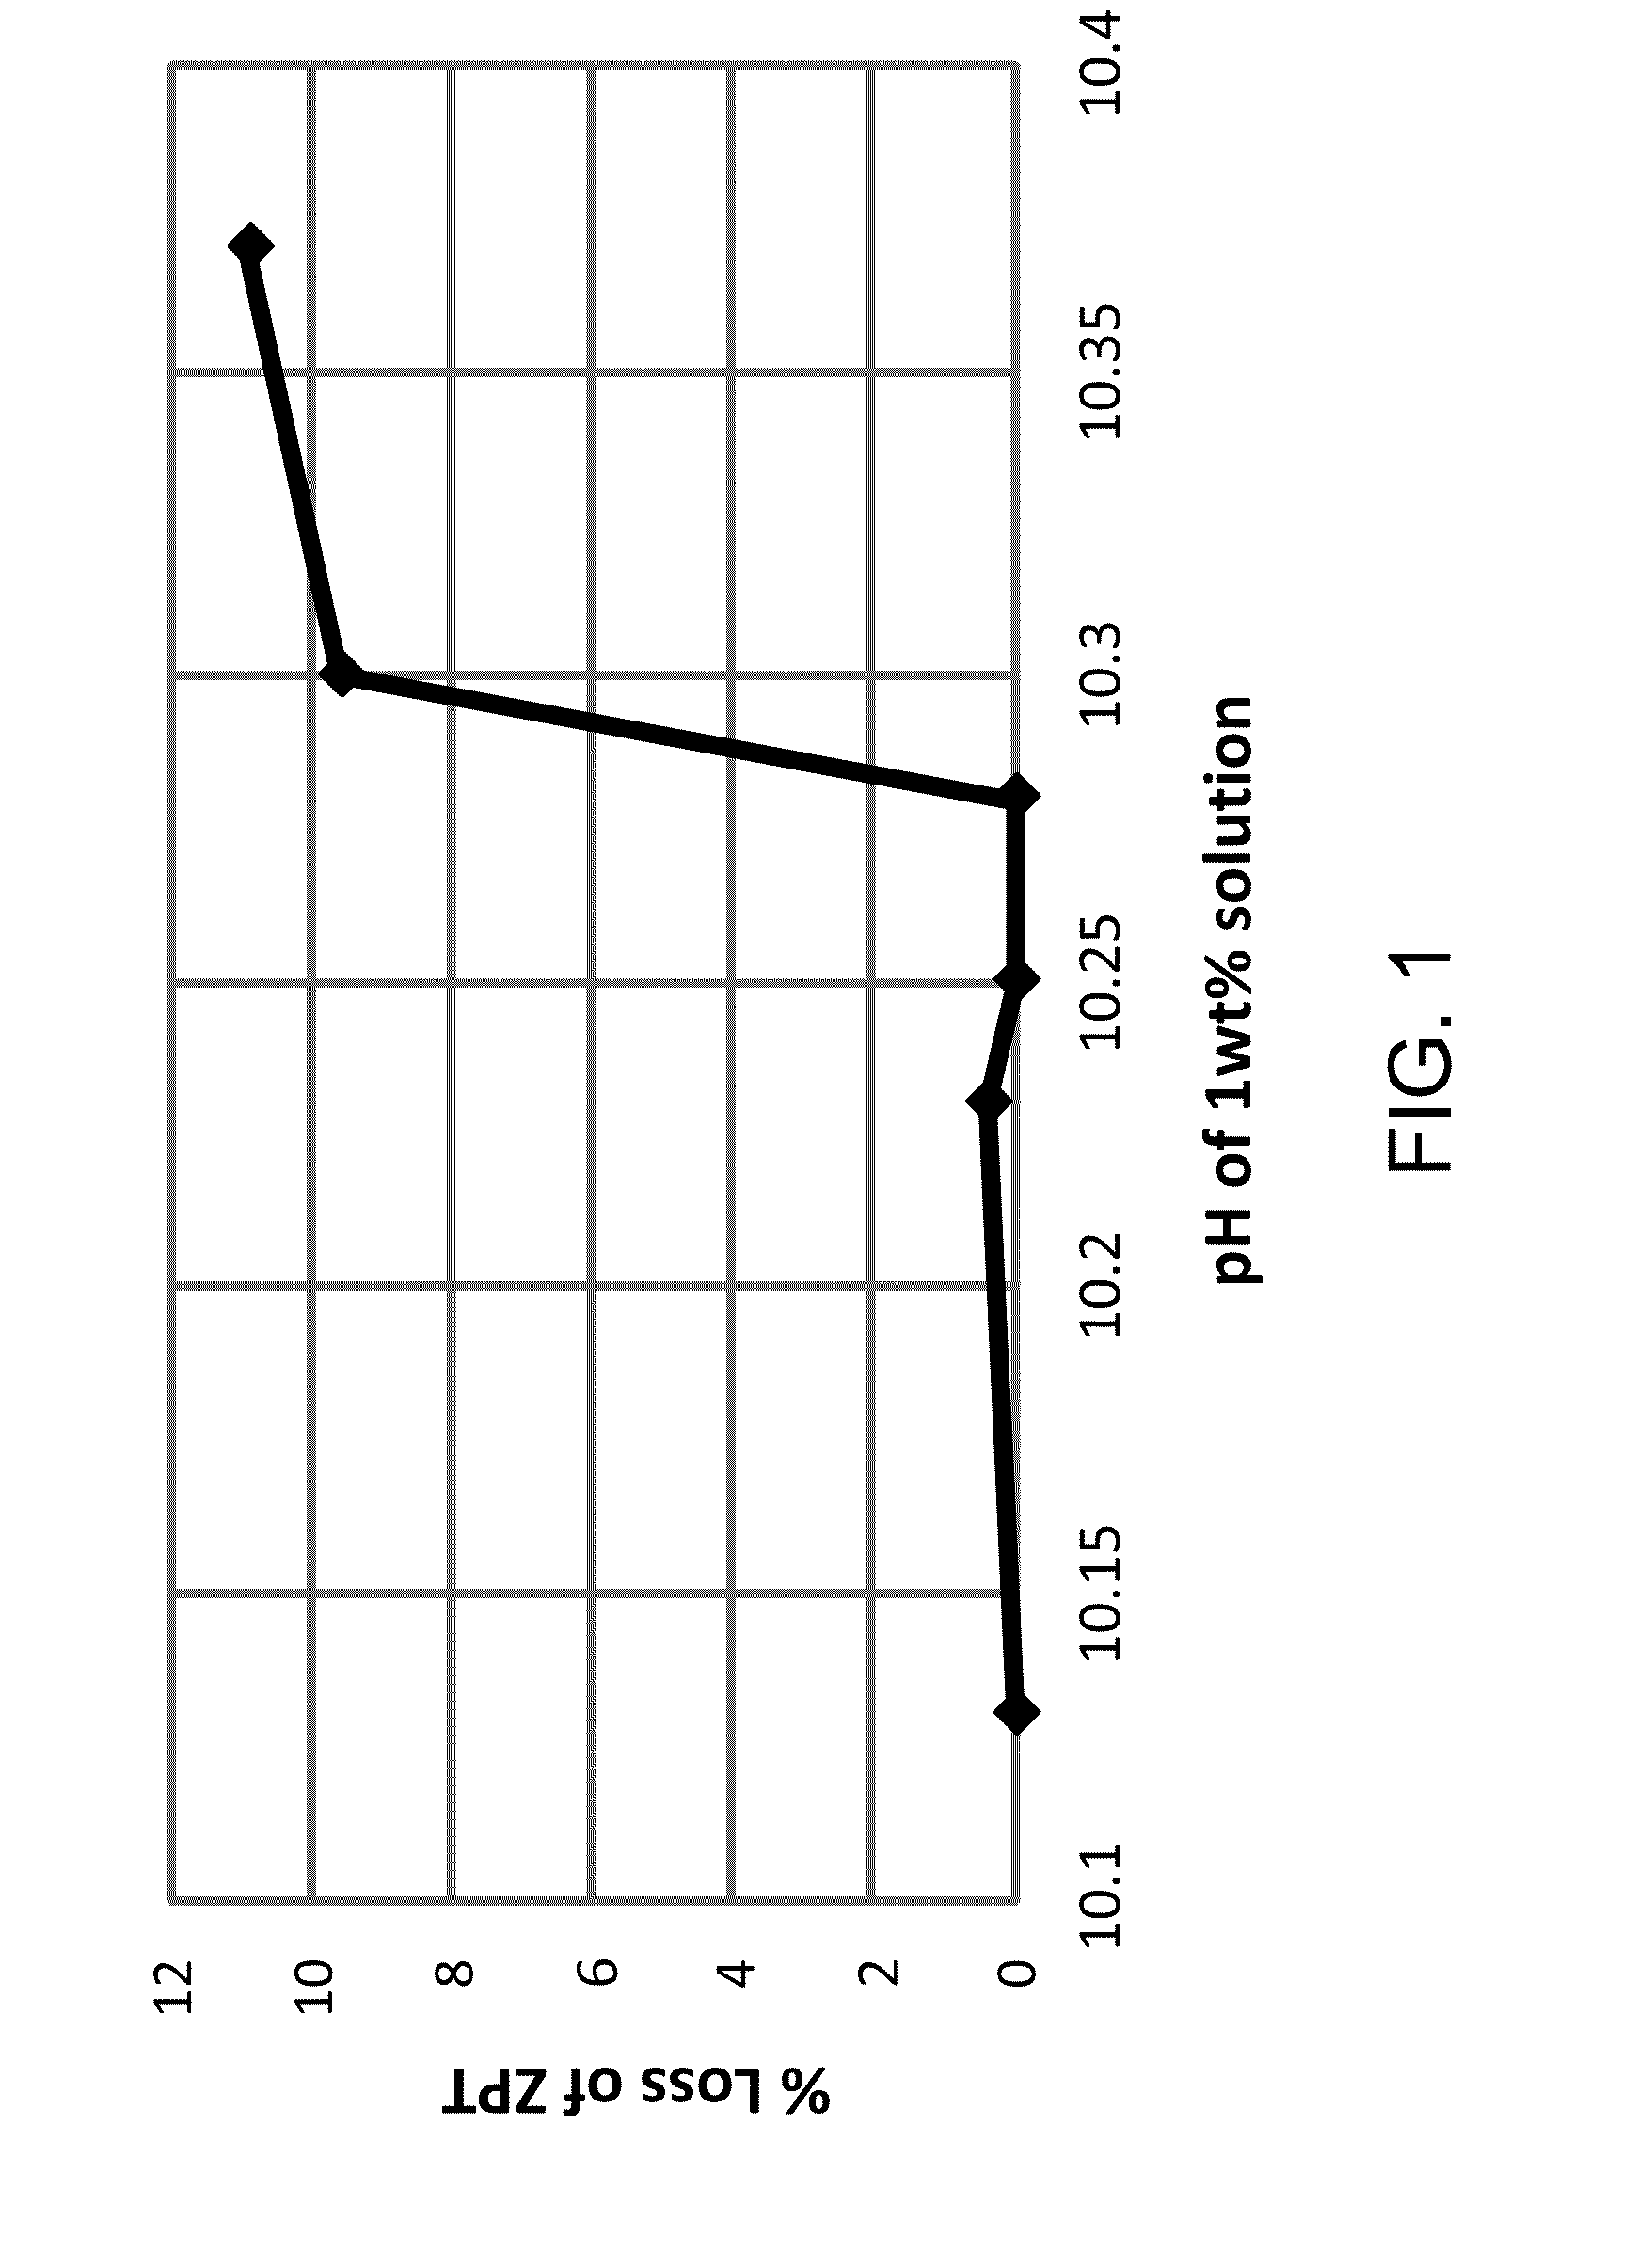 Personal Cleansing Compositions Comprising Zinc Pyrithione